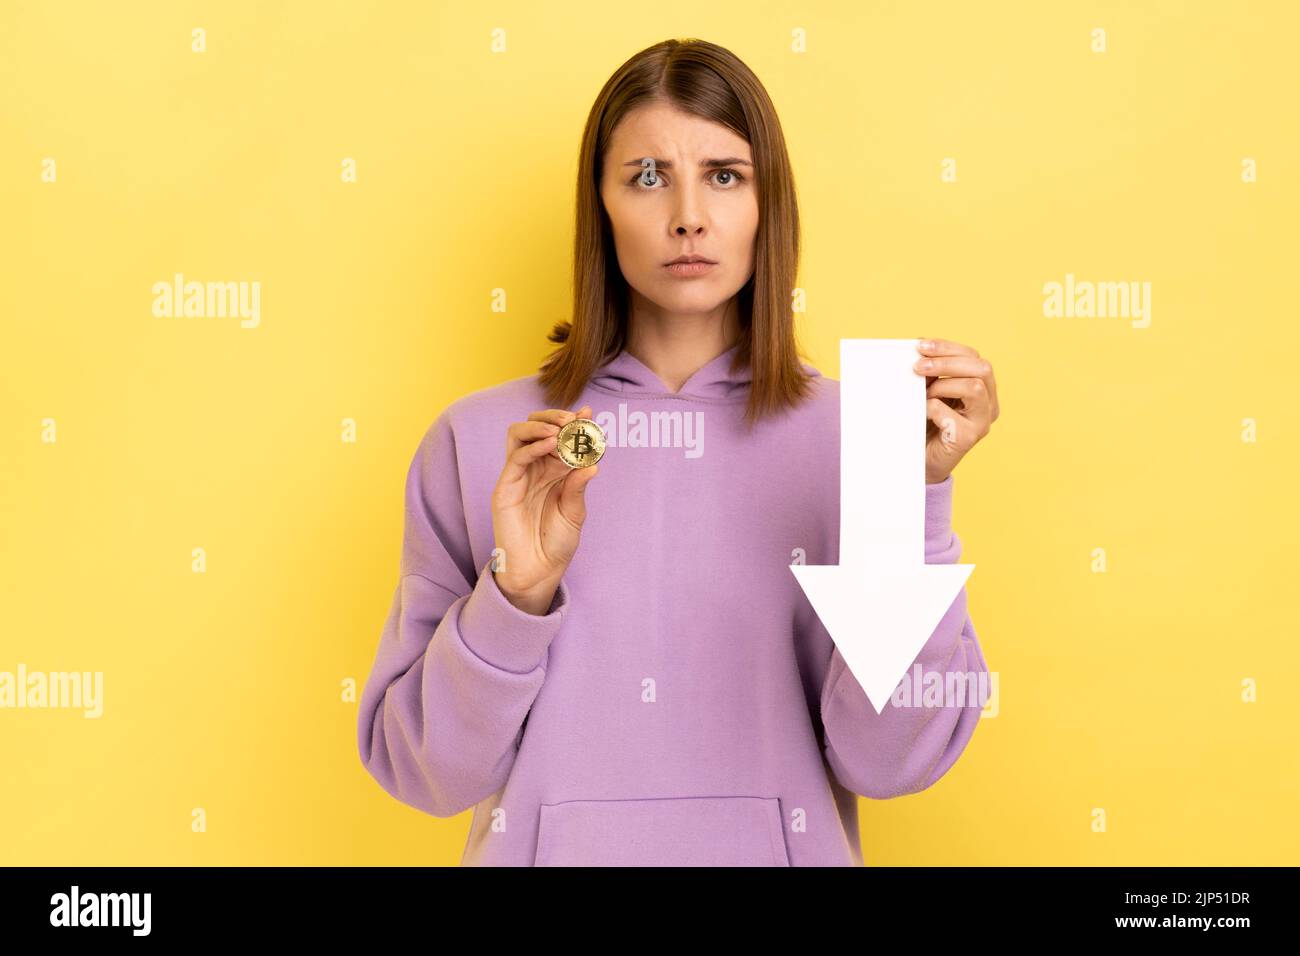 Portrait of unhappy upset woman showing bitcoin and white arrow pointing down, expressing negative emotions, wearing purple hoodie. Indoor studio shot isolated on yellow background. Stock Photo